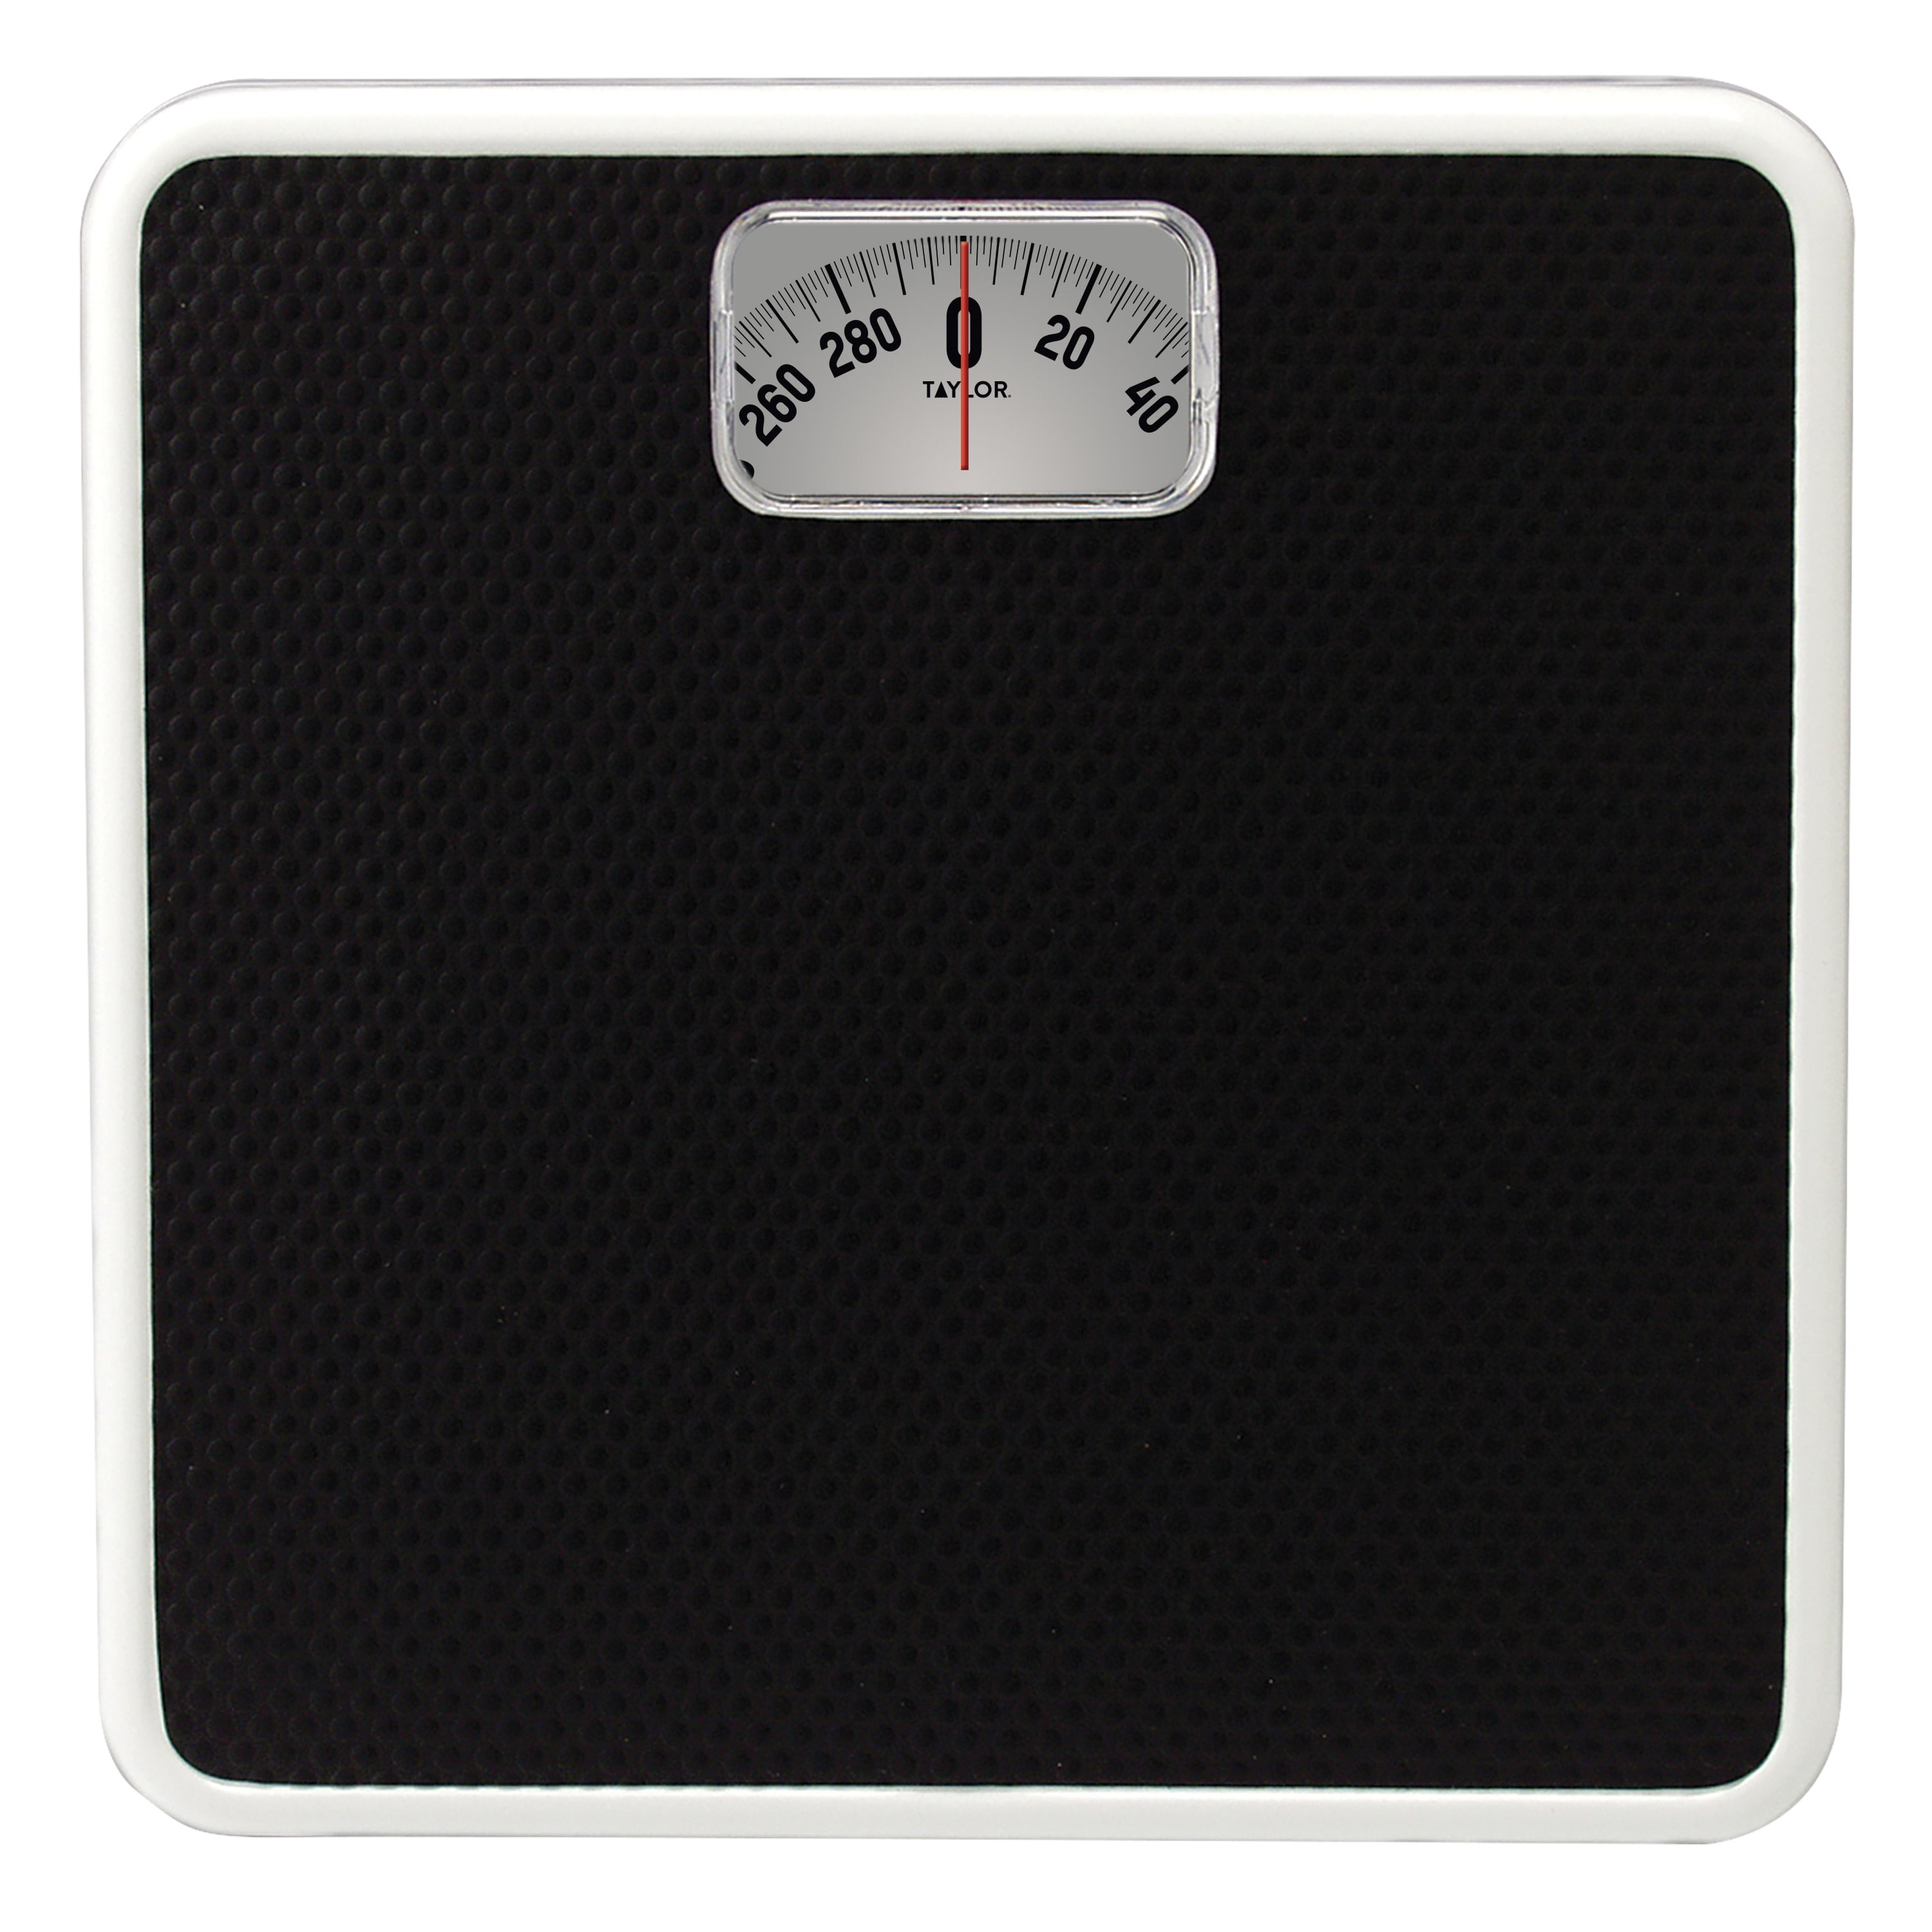 Taylor 9.8” x 9.8” 300 lb Analog Dial Bathroom Scale with Dial Display Black